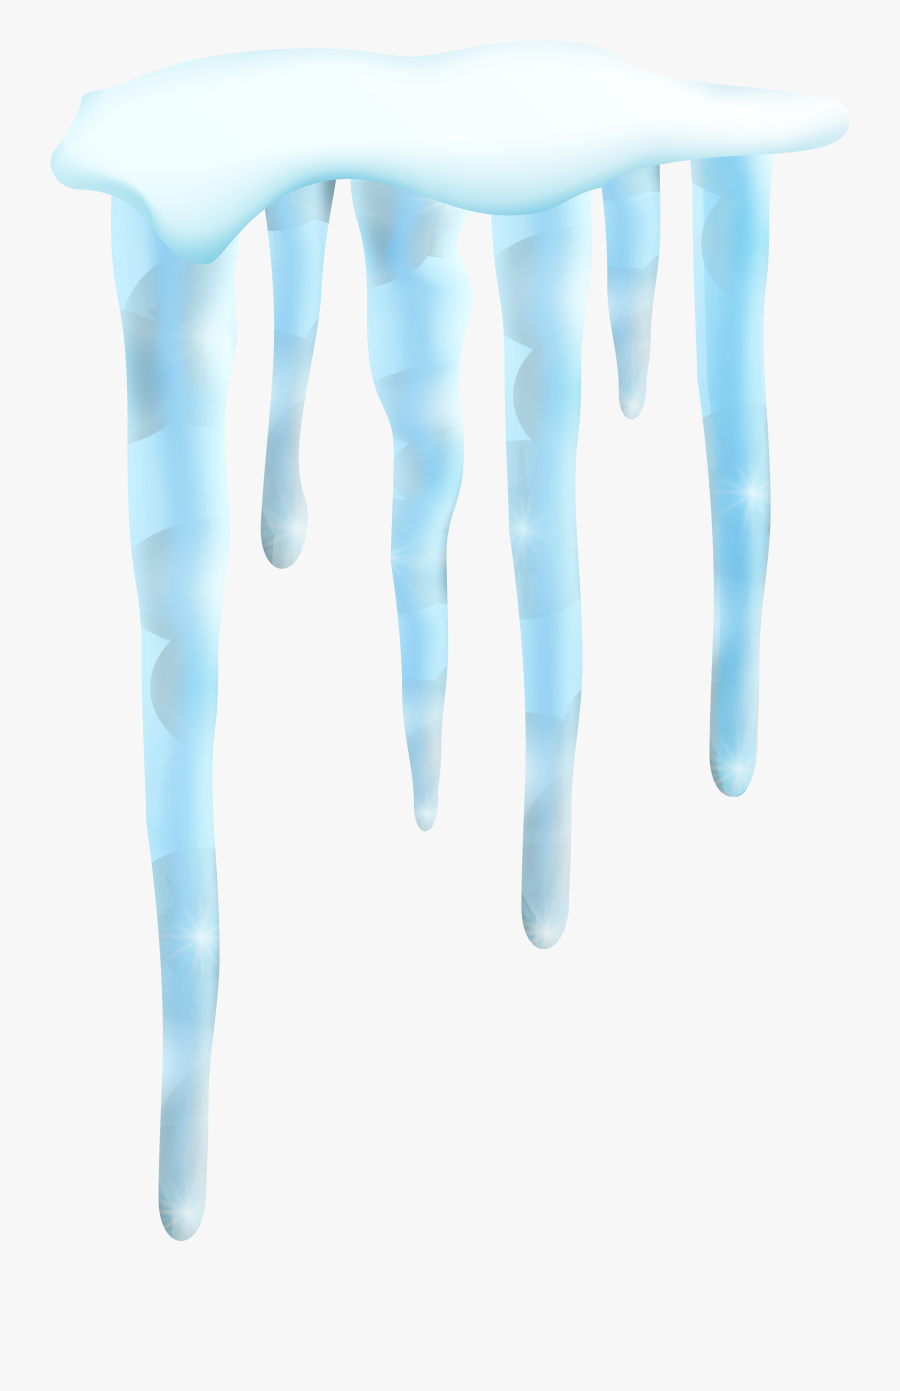 Icicles Png Image - Icicle, Transparent Clipart